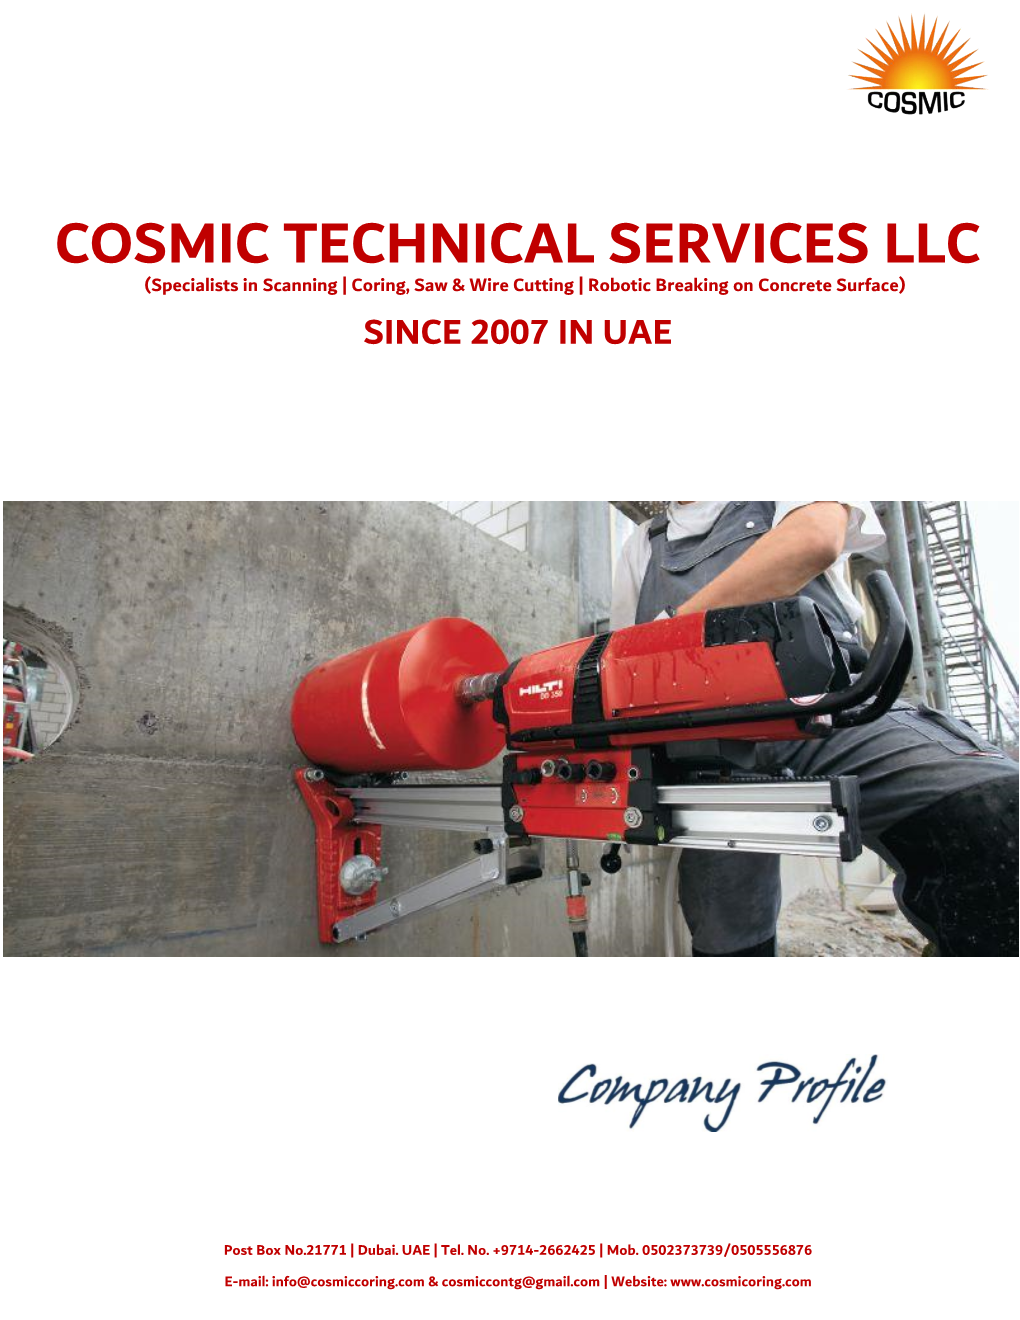 Cosmic Technical Services